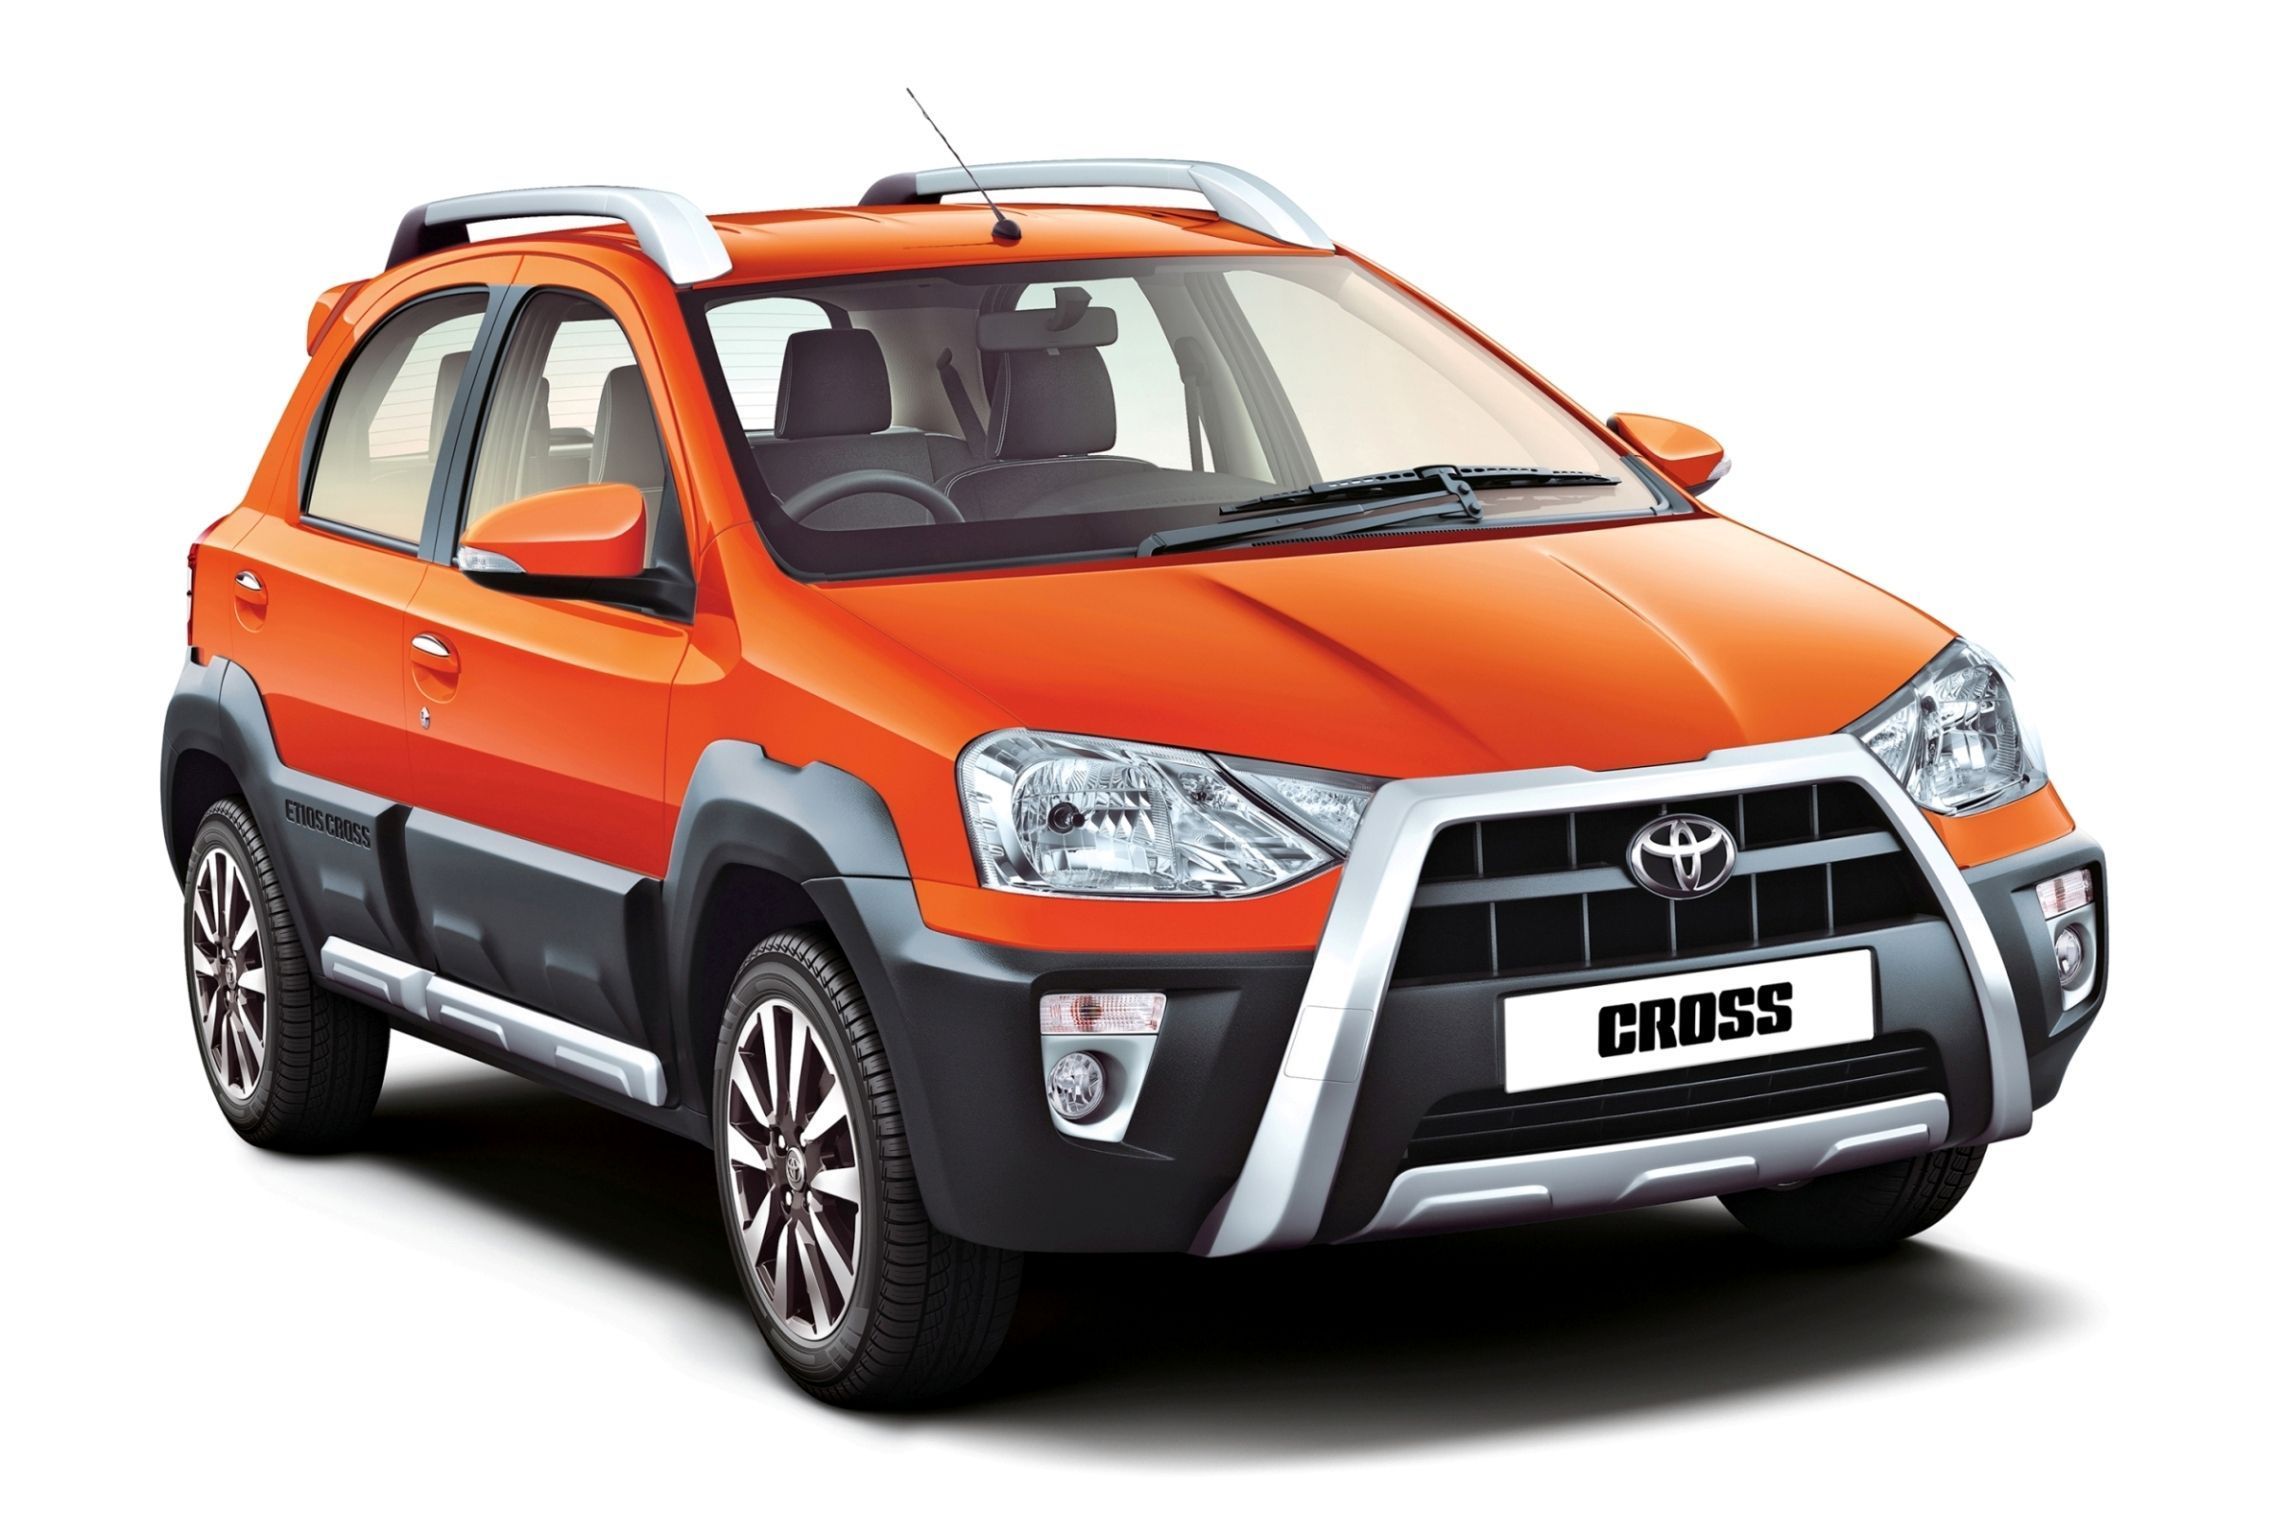 Toyota Etios Cross launched in India at Rs 5 lakhs 76 thousand